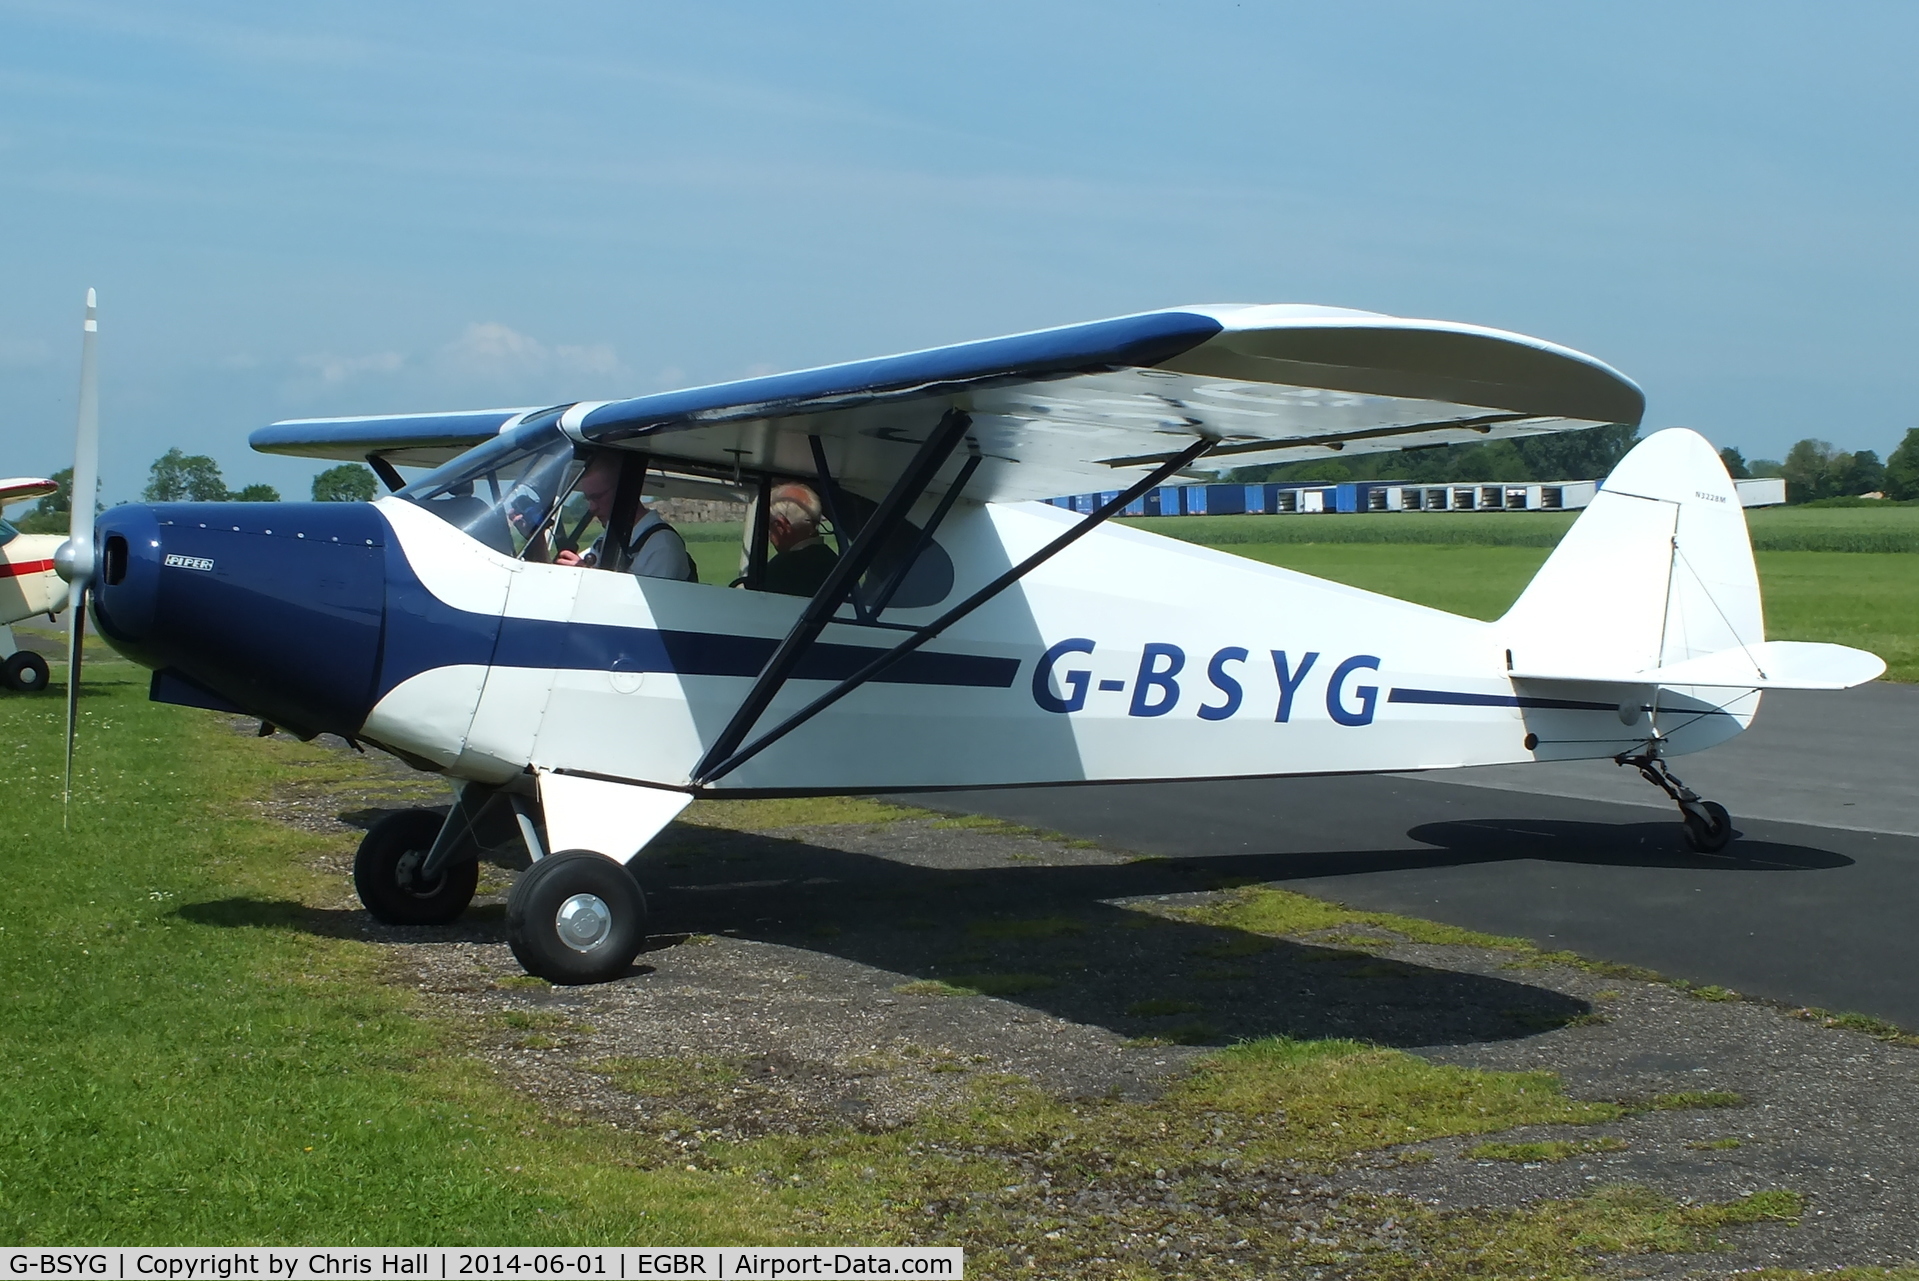 G-BSYG, 1947 Piper PA-12 Super Cruiser C/N 12-2106, at Breighton's Open Cockpit & Biplane Fly-in, 2014